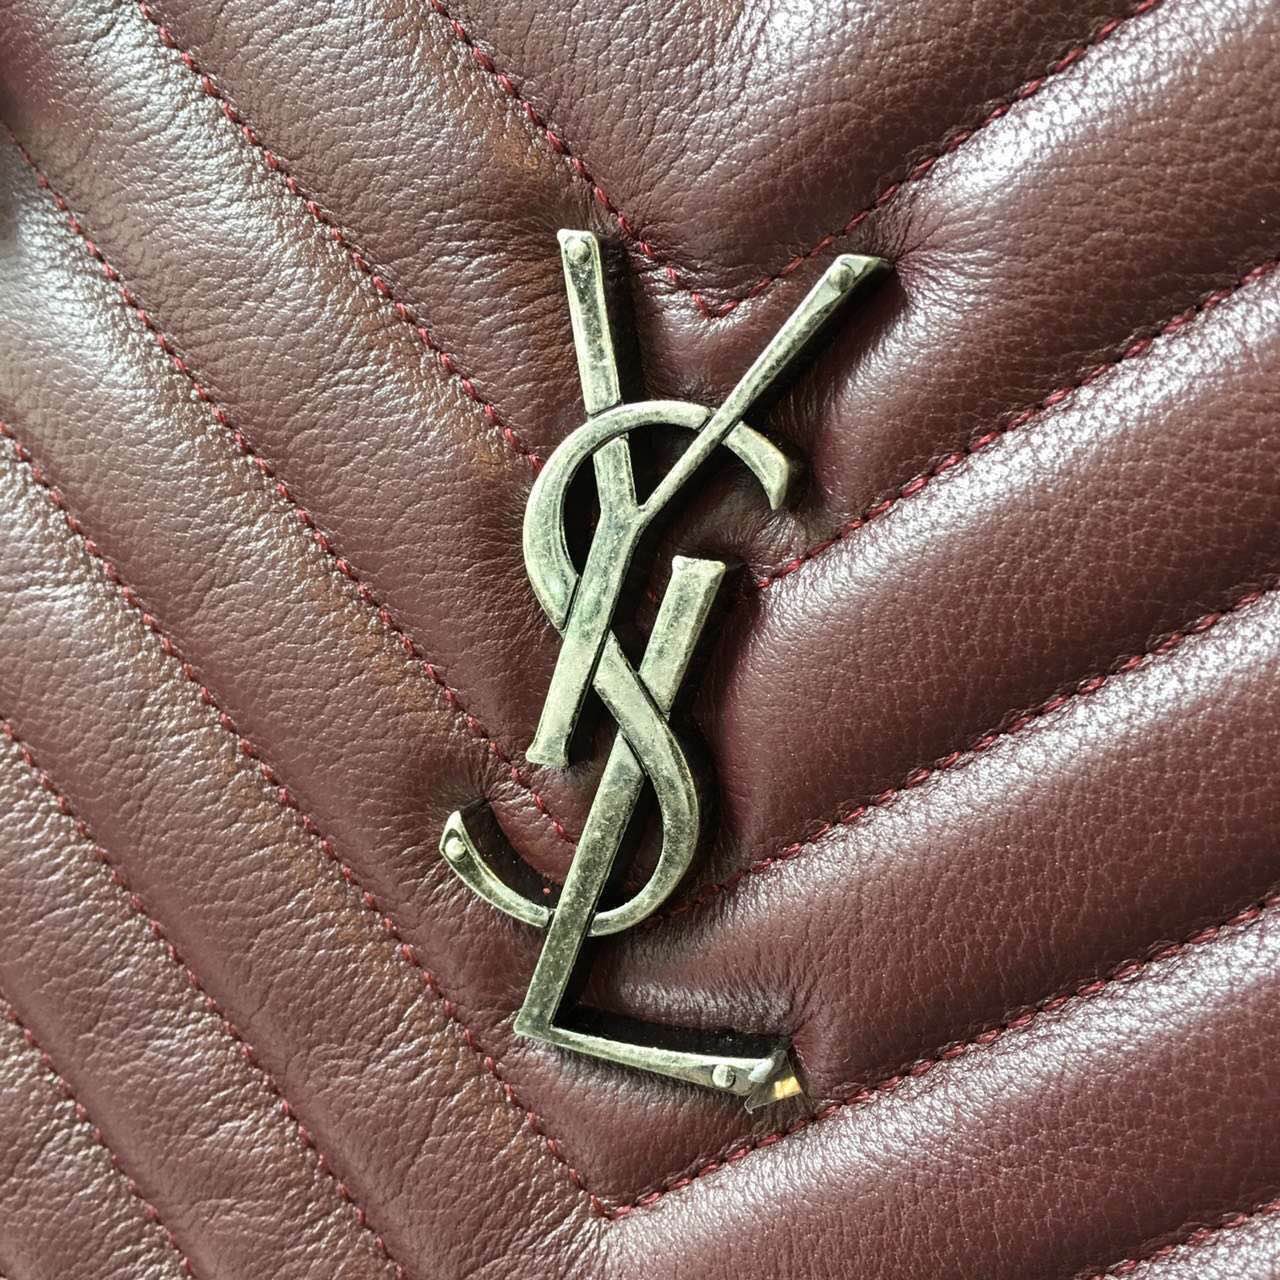 New Arrival!2016 Cheap YSL Out Sale with Free Shipping-Saint Laurent Classic Monogram Shopping Bag in Bordeaux MATELASSE Leather - Click Image to Close